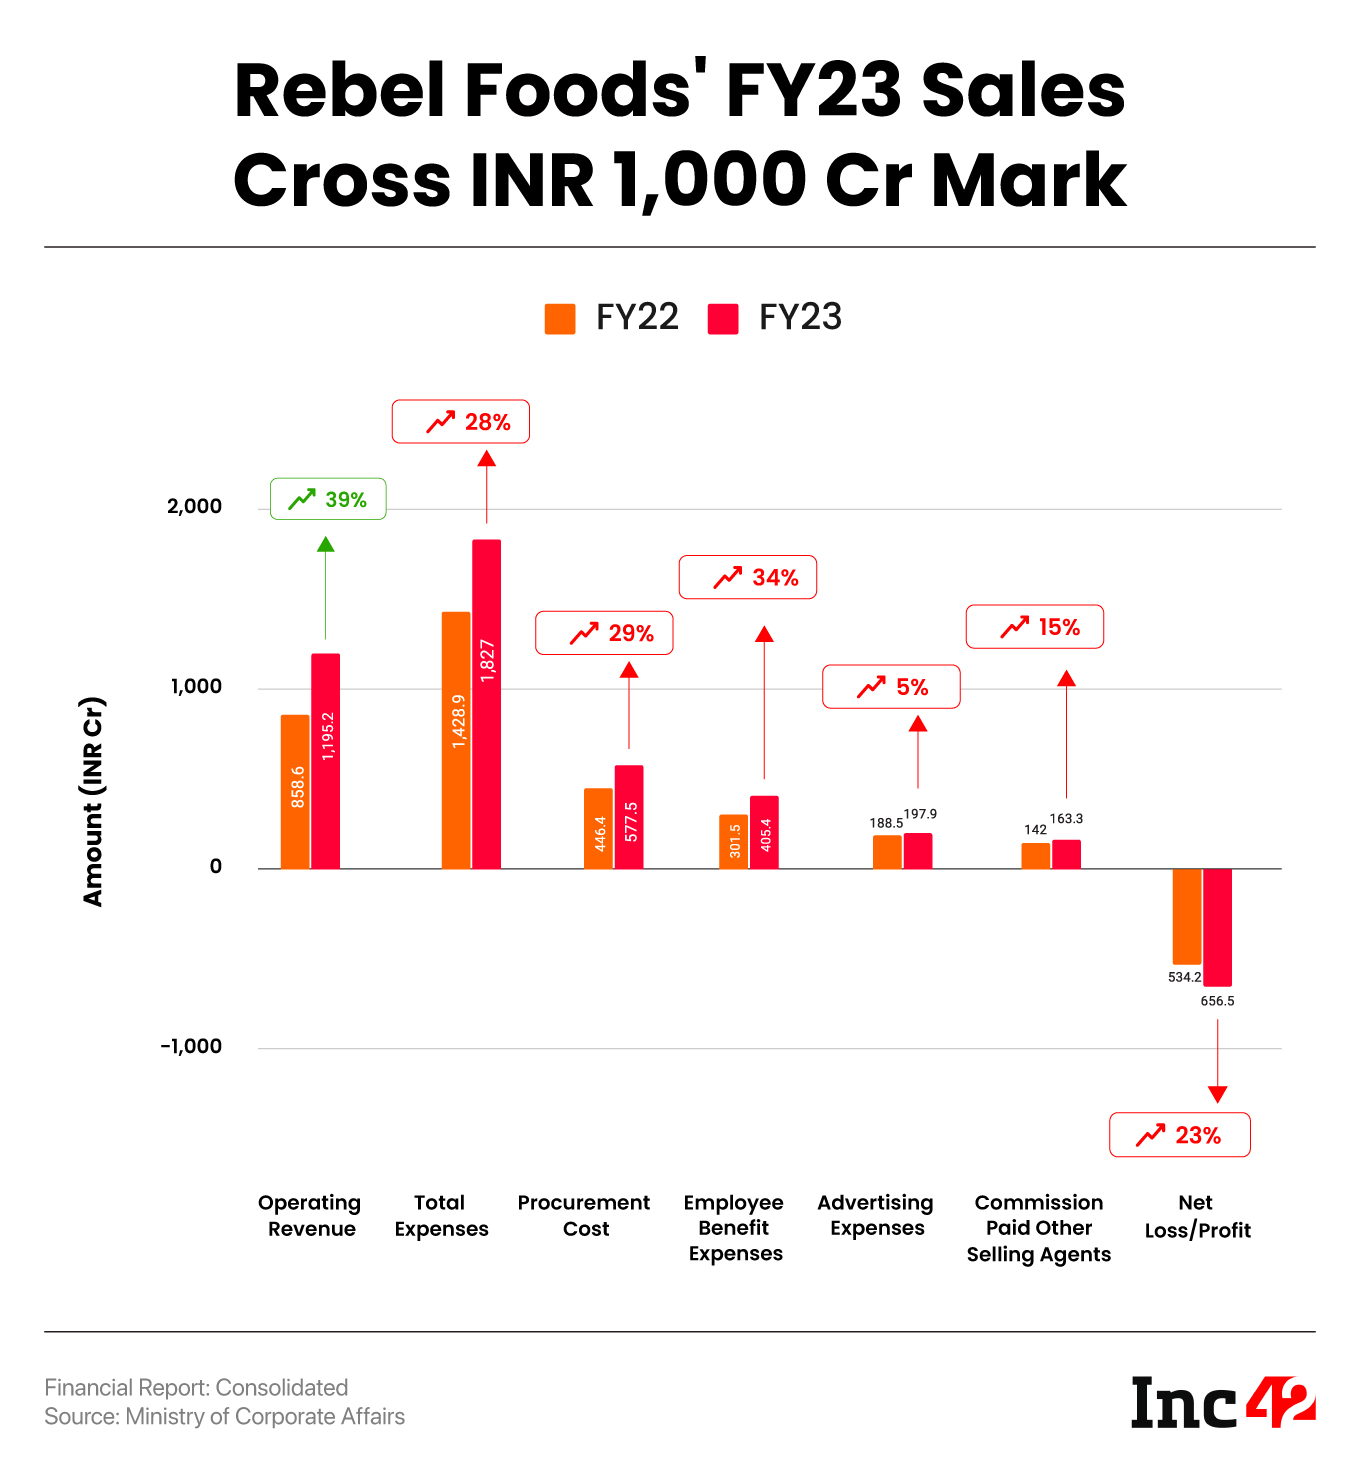 Rebel Foods reported an operating revenue of INR 1,195.2 Cr in FY23, a 39% increase from INR 858.6 Cr in FY22 